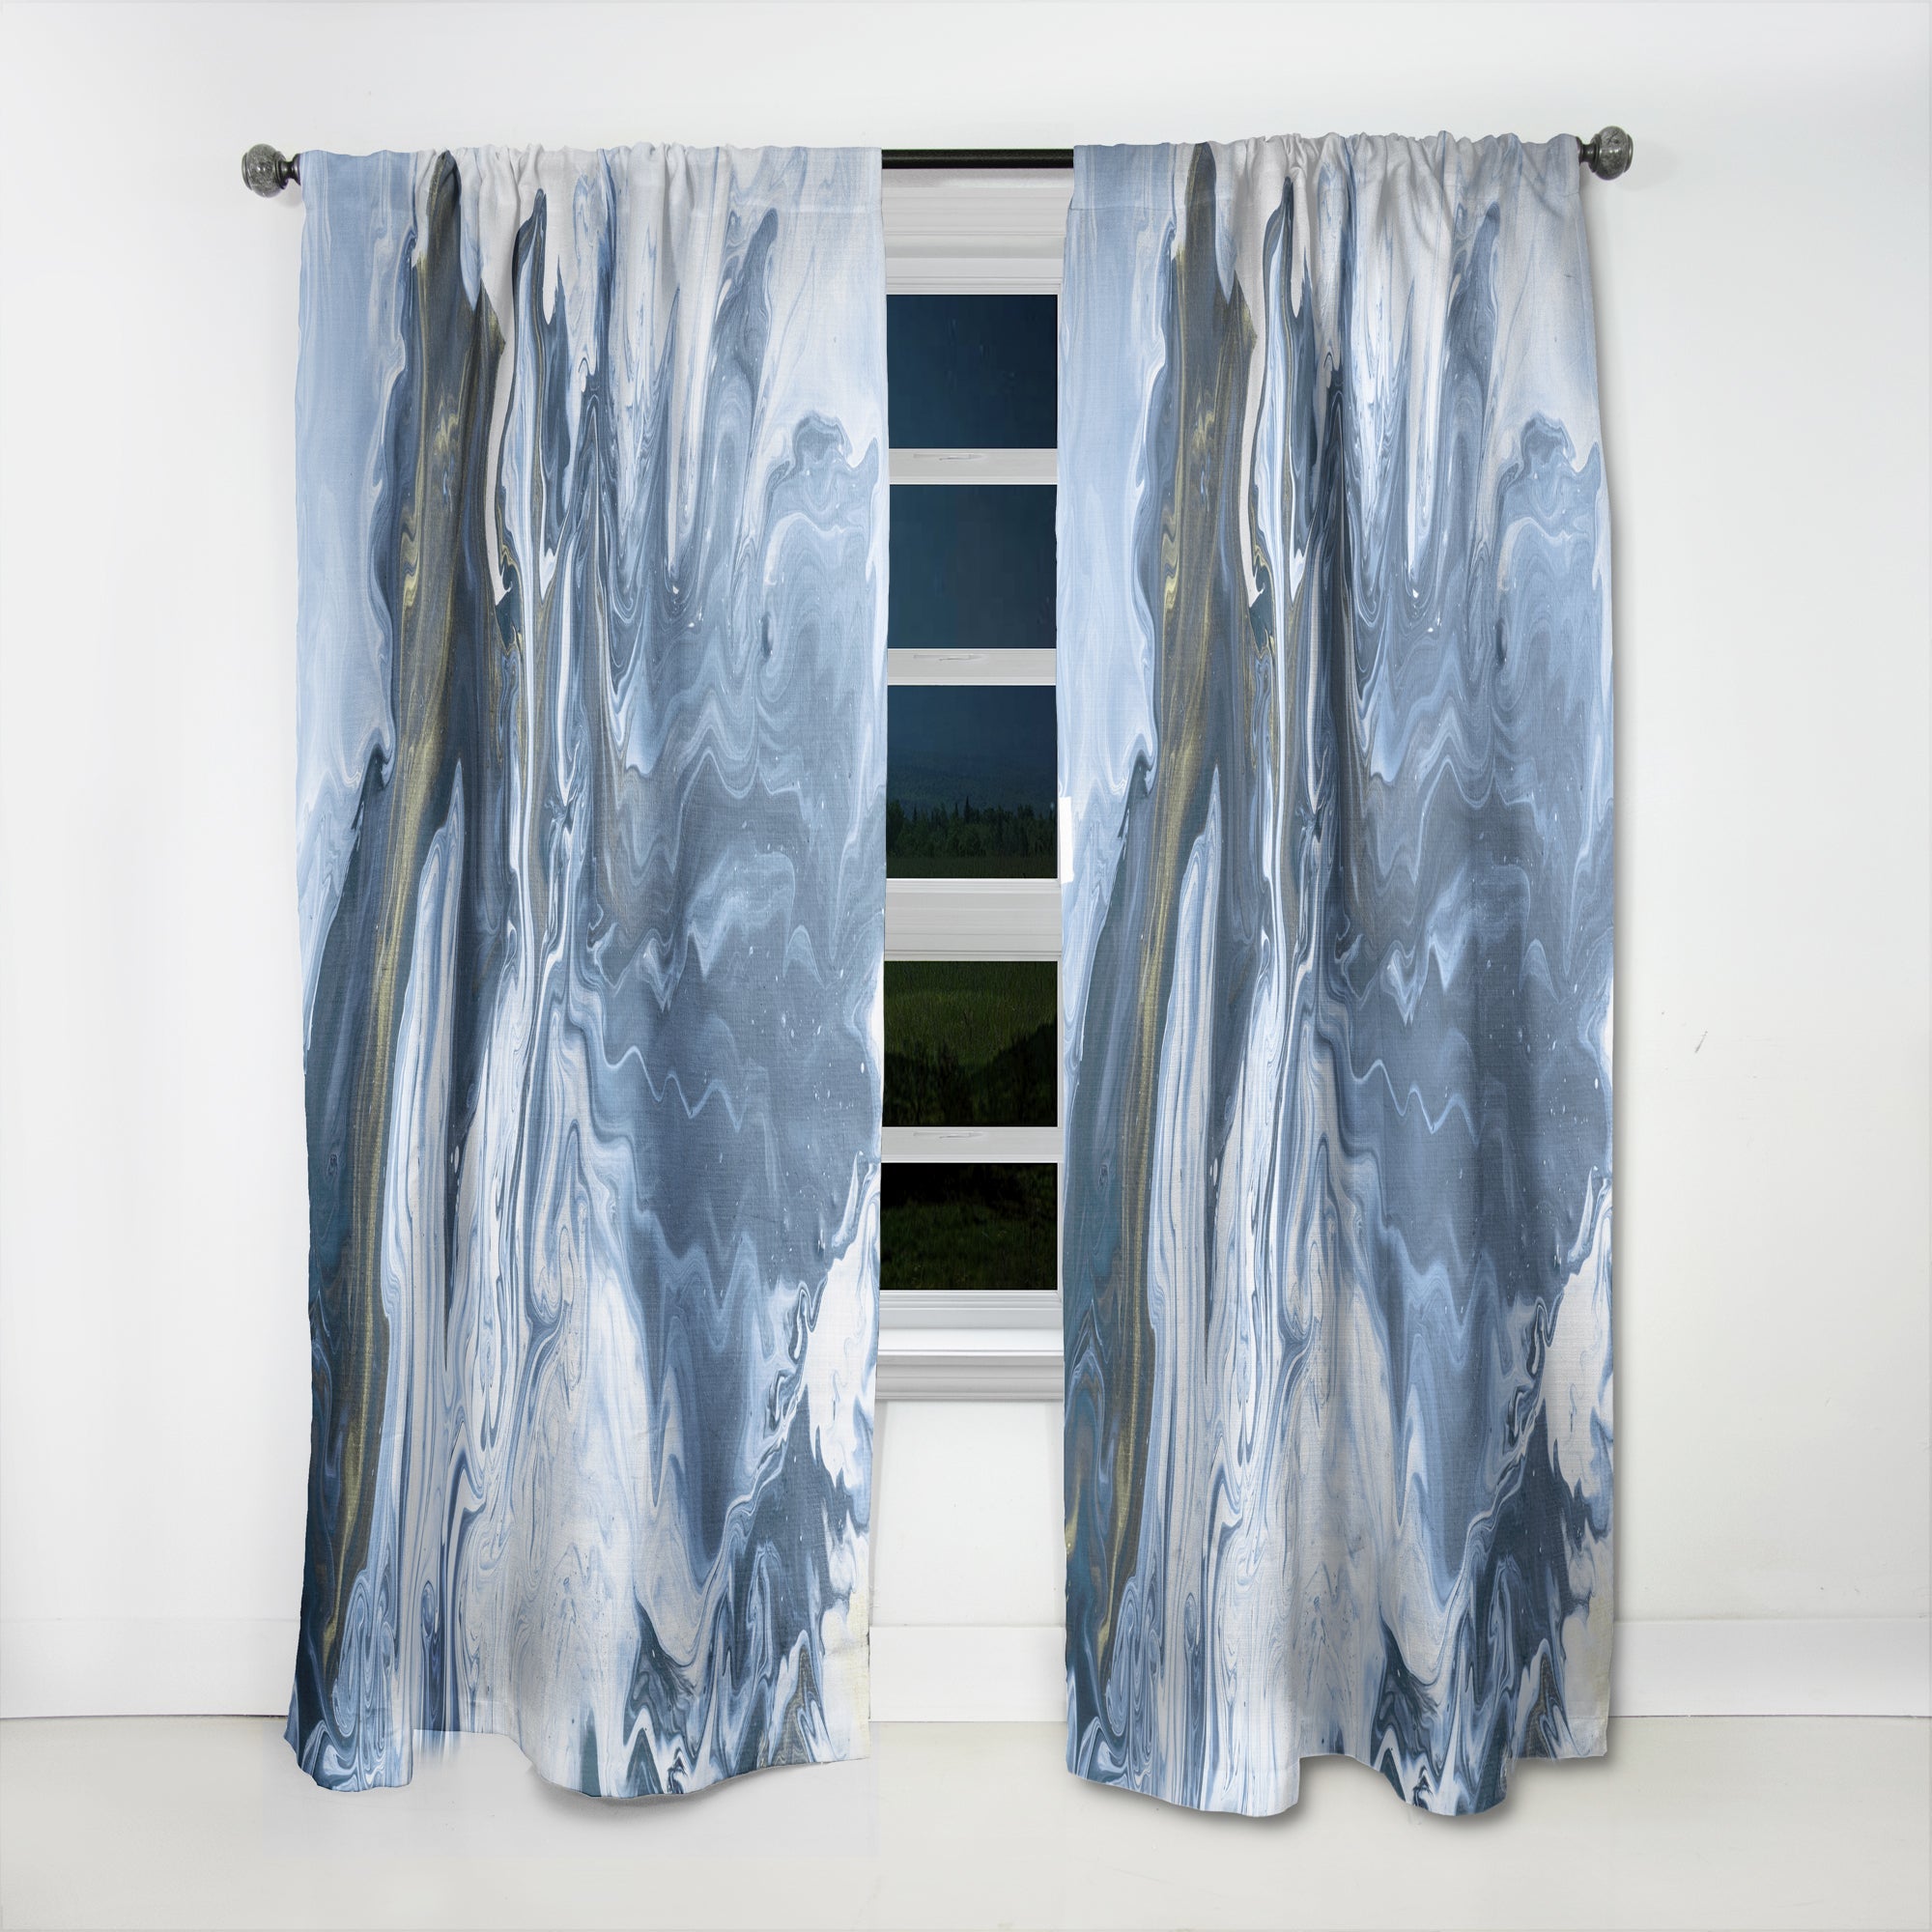 White, grey and White Hand Painted Marble Acrylic III' Modern Curtain Panel